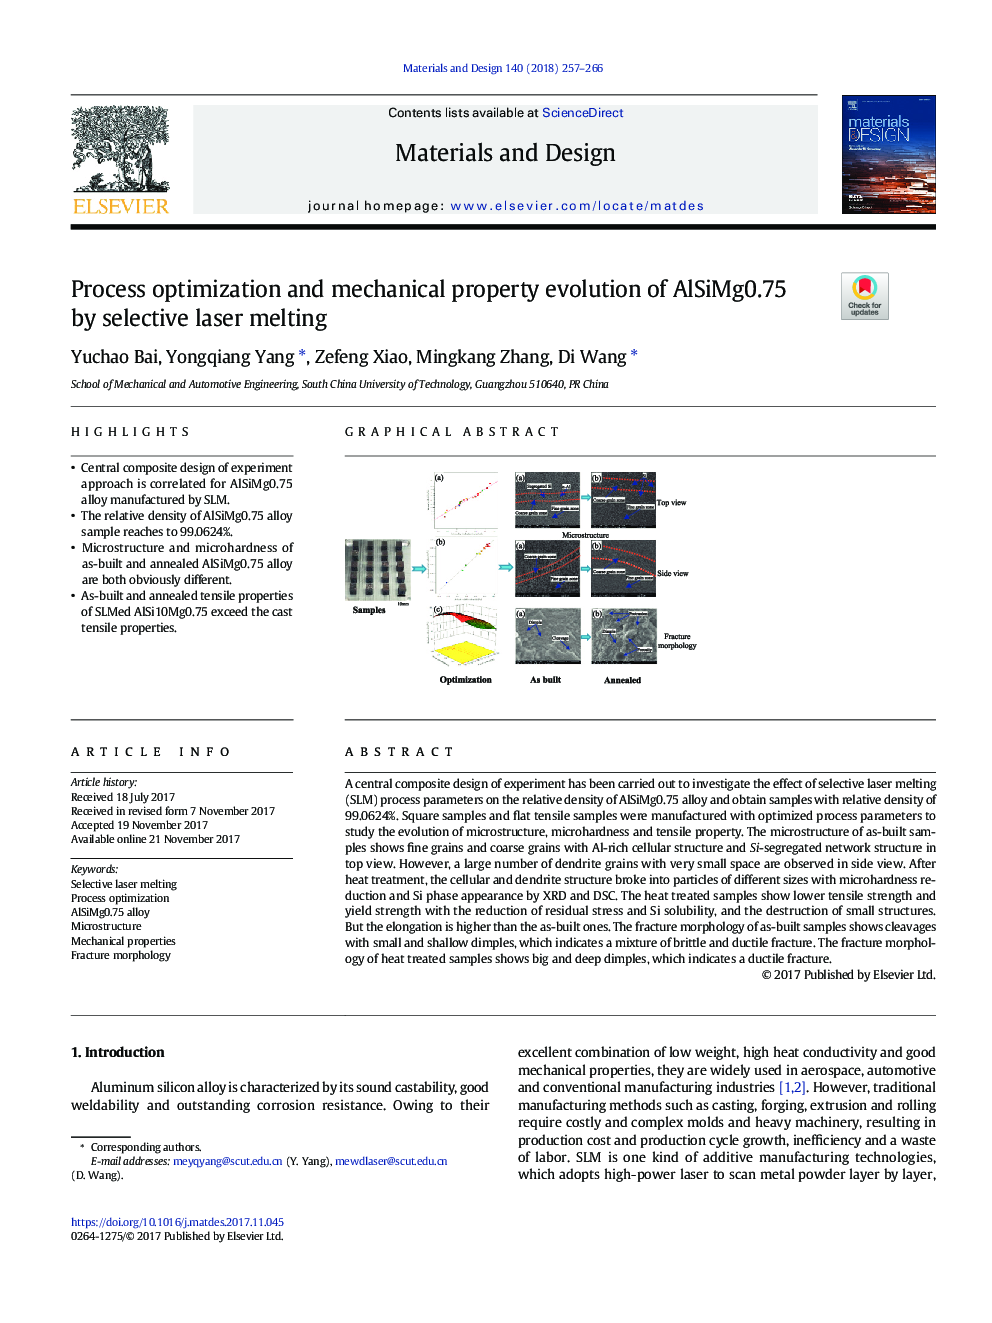 Process optimization and mechanical property evolution of AlSiMg0.75 by selective laser melting